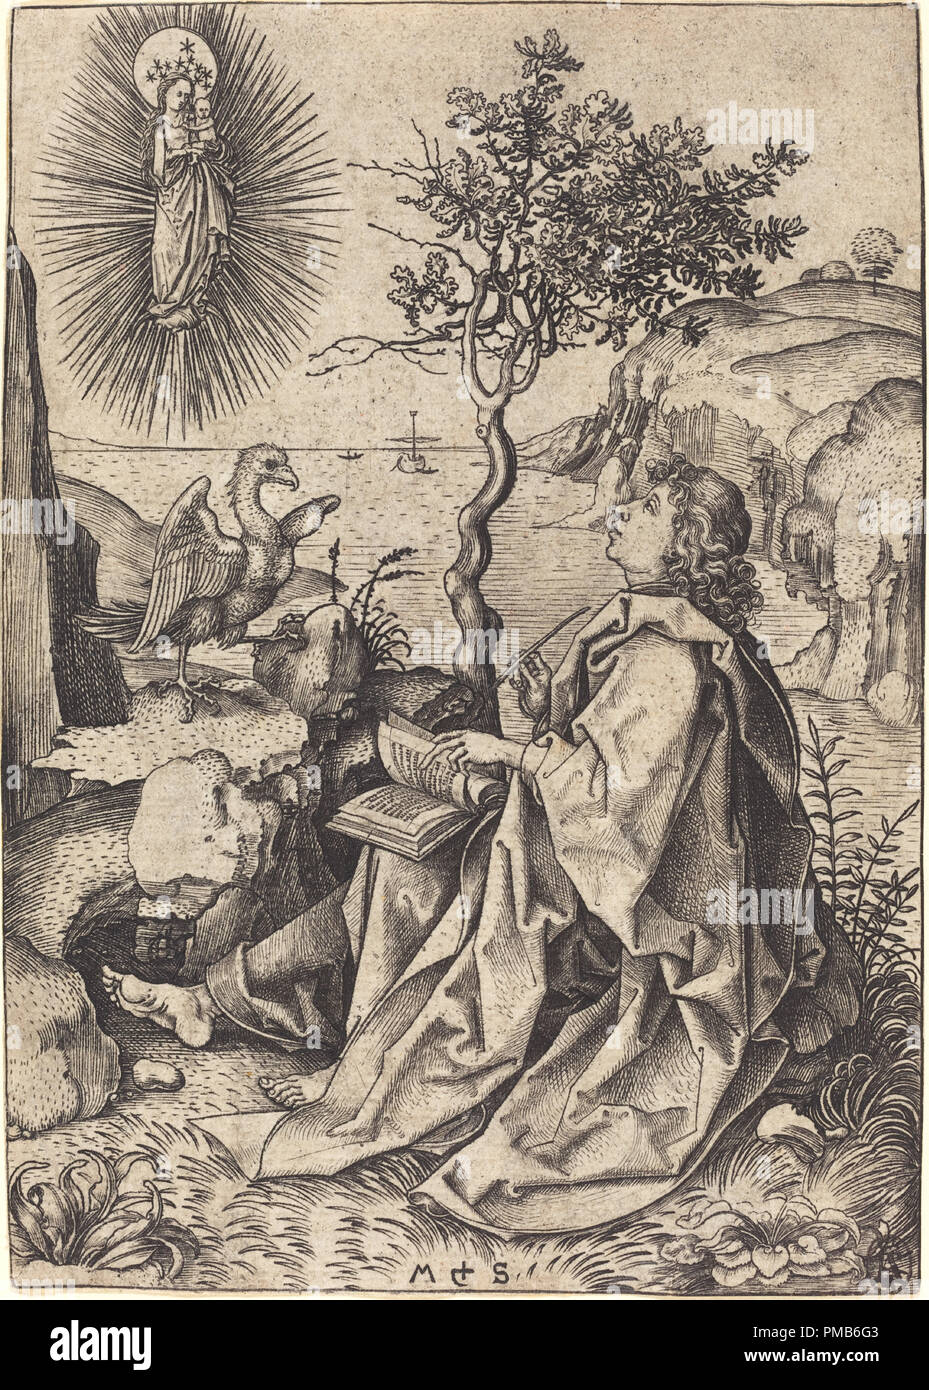 Saint John on Patmos. Dated: c. 1475/1480. Dimensions: sheet (trimmed to plate mark): 16 x 11.3 cm (6 5/16 x 4 7/16 in.). Medium: engraving on laid paper. Museum: National Gallery of Art, Washington DC. Author: Martin Schongauer. Stock Photo